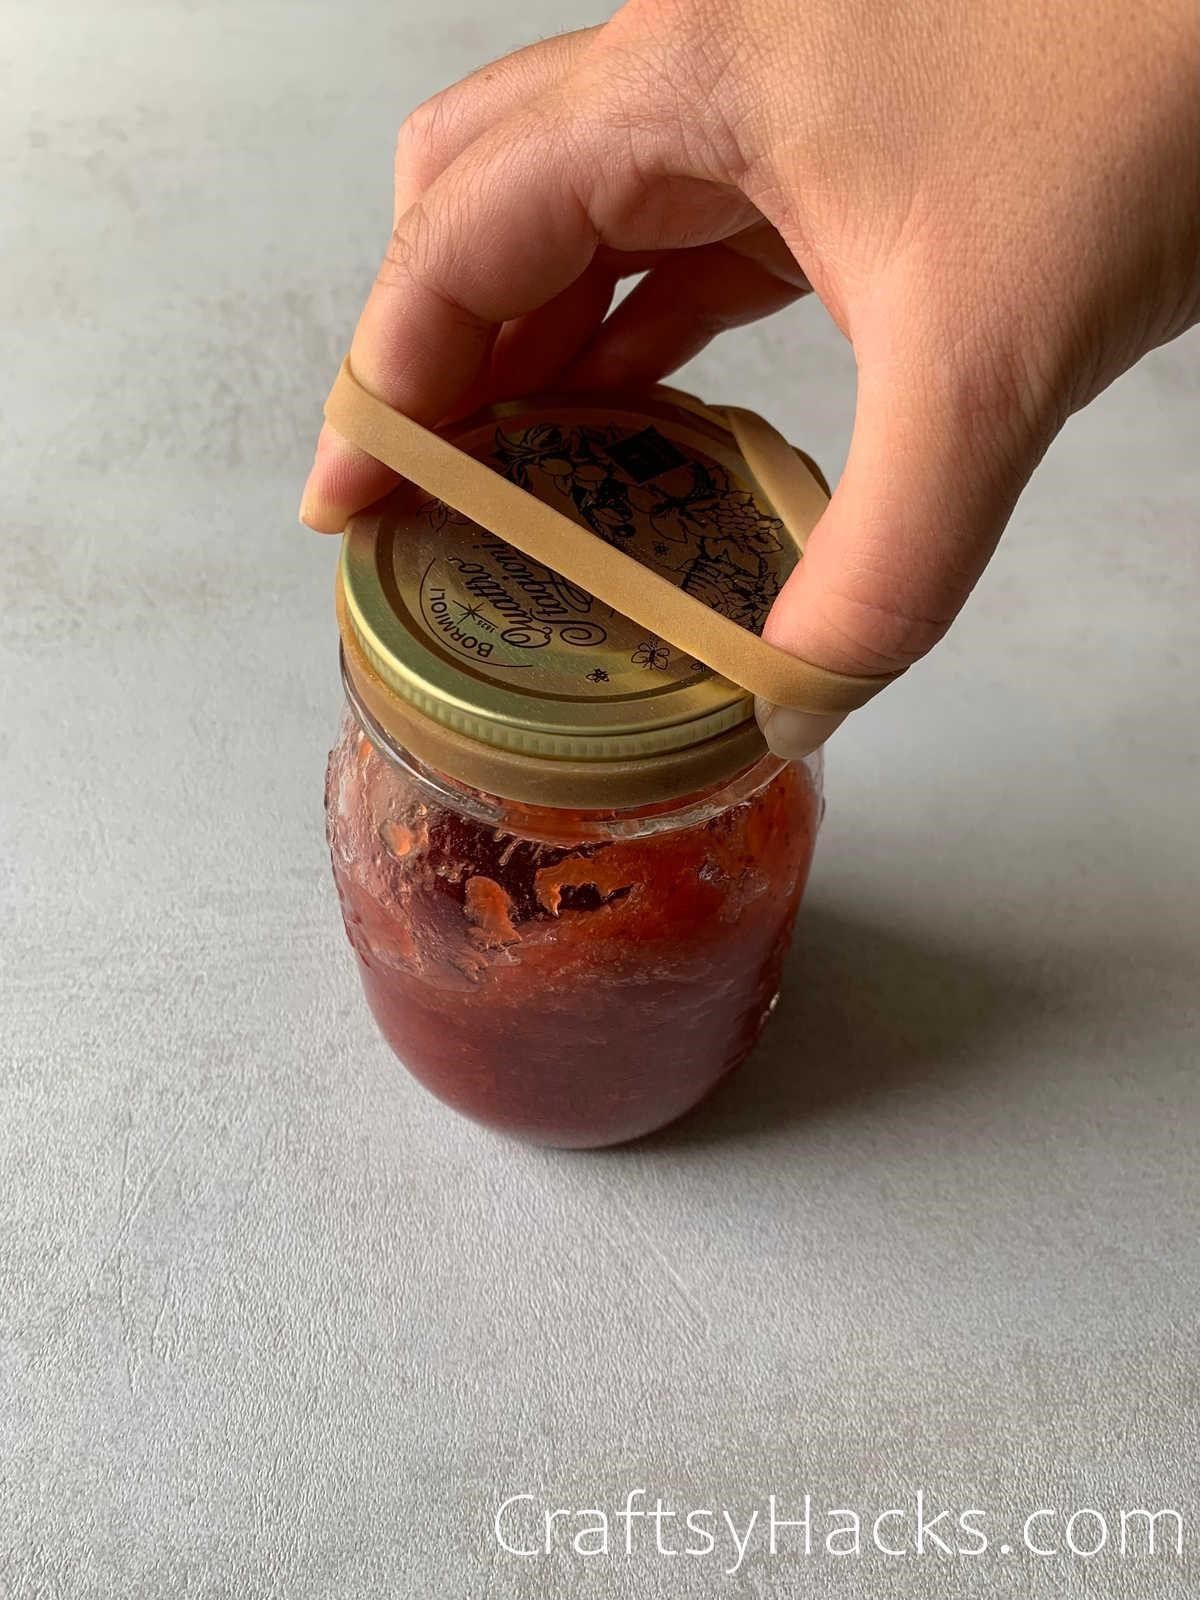 open stubborn jar with rubber band